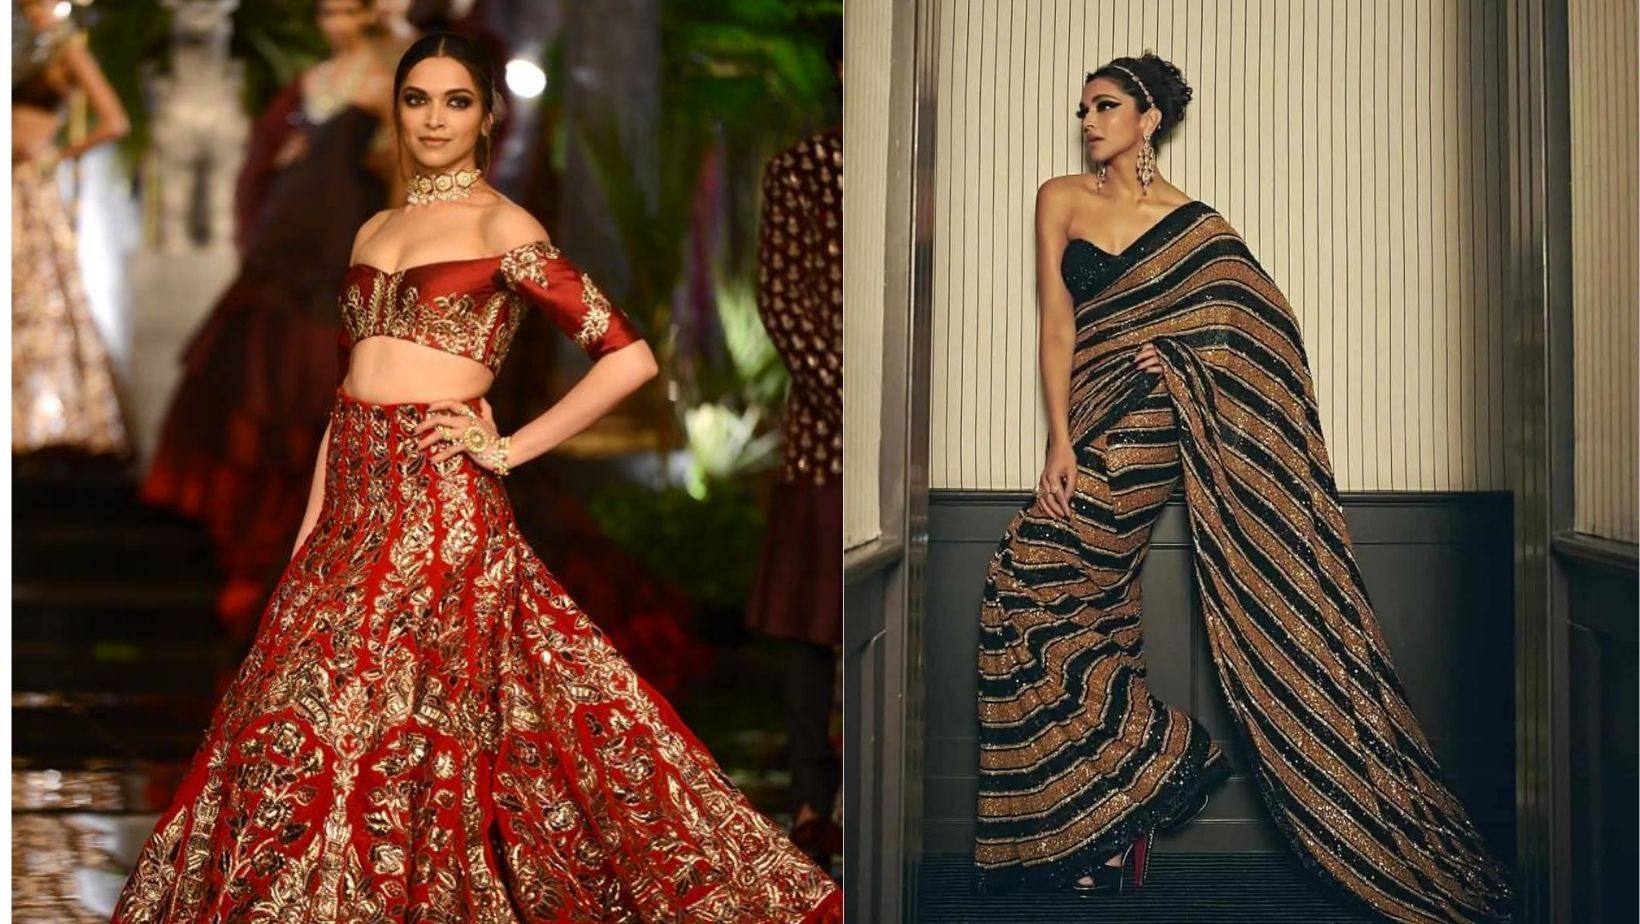 Take a look at the 15 best Indian lehenga designers in the industry